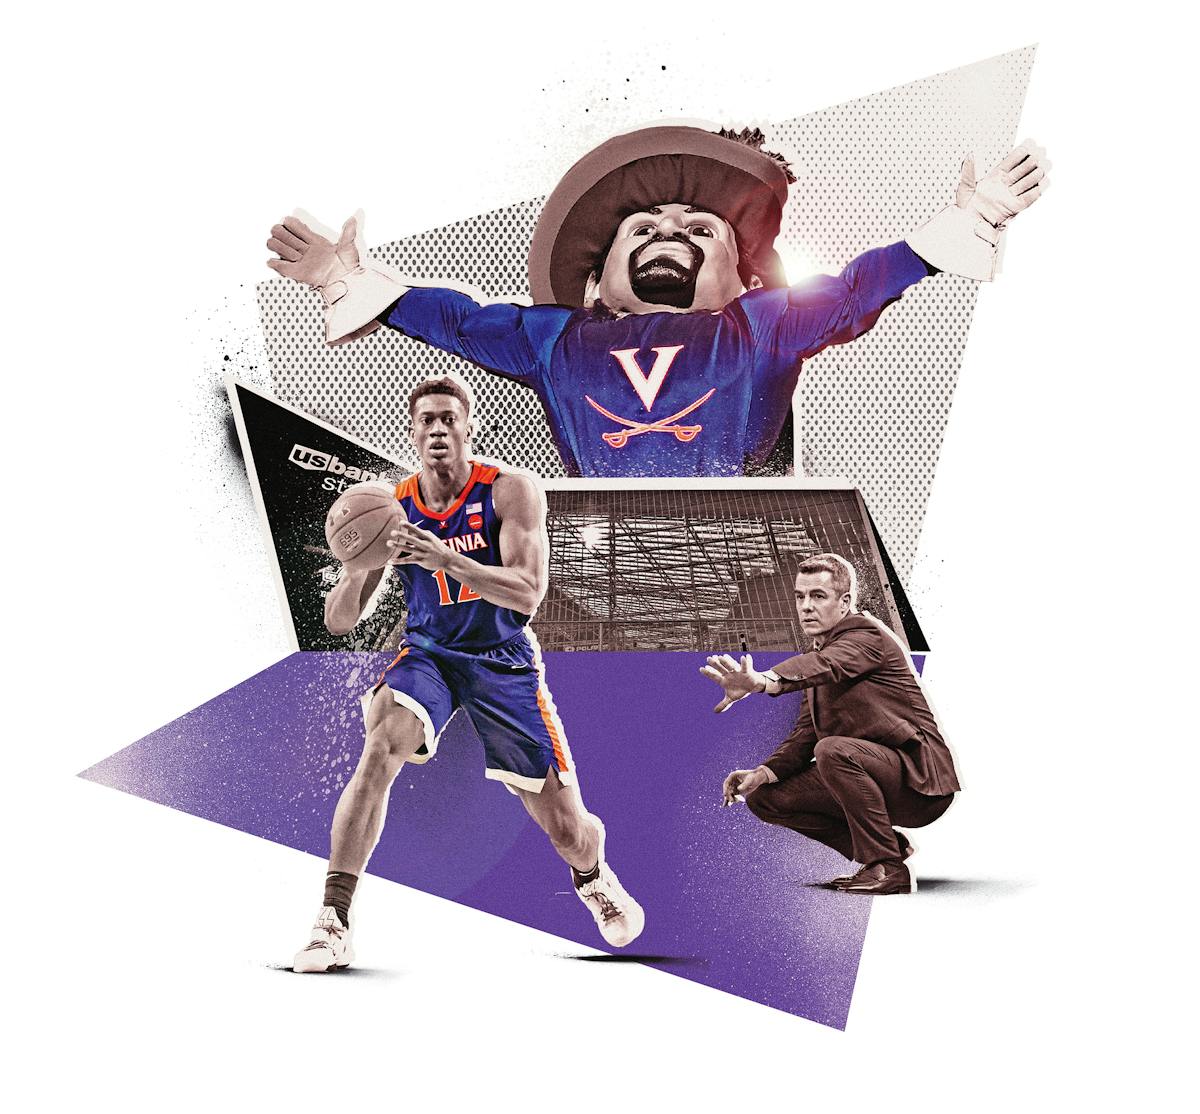 Inline illustration for the 2019 NCAA Men's Final Four basketball tournament that is being held in Minneapolis. Element includes coach Tony Bennett, D